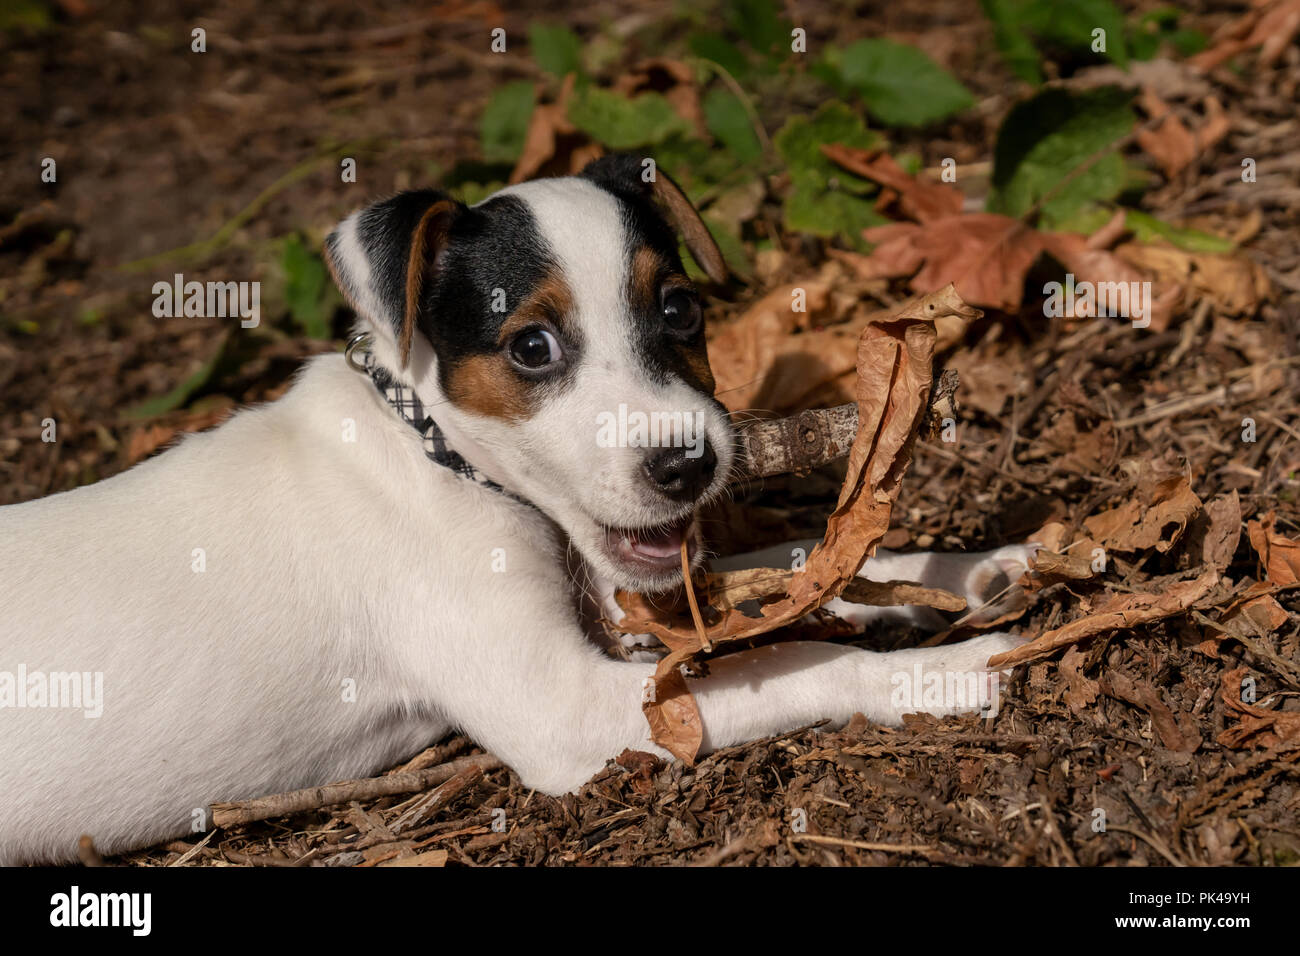 Two month old Jack Russell Terrier 'Harry' reclining on the ground of natural Pacific Northwest backyard, chewing a stick Stock Photo